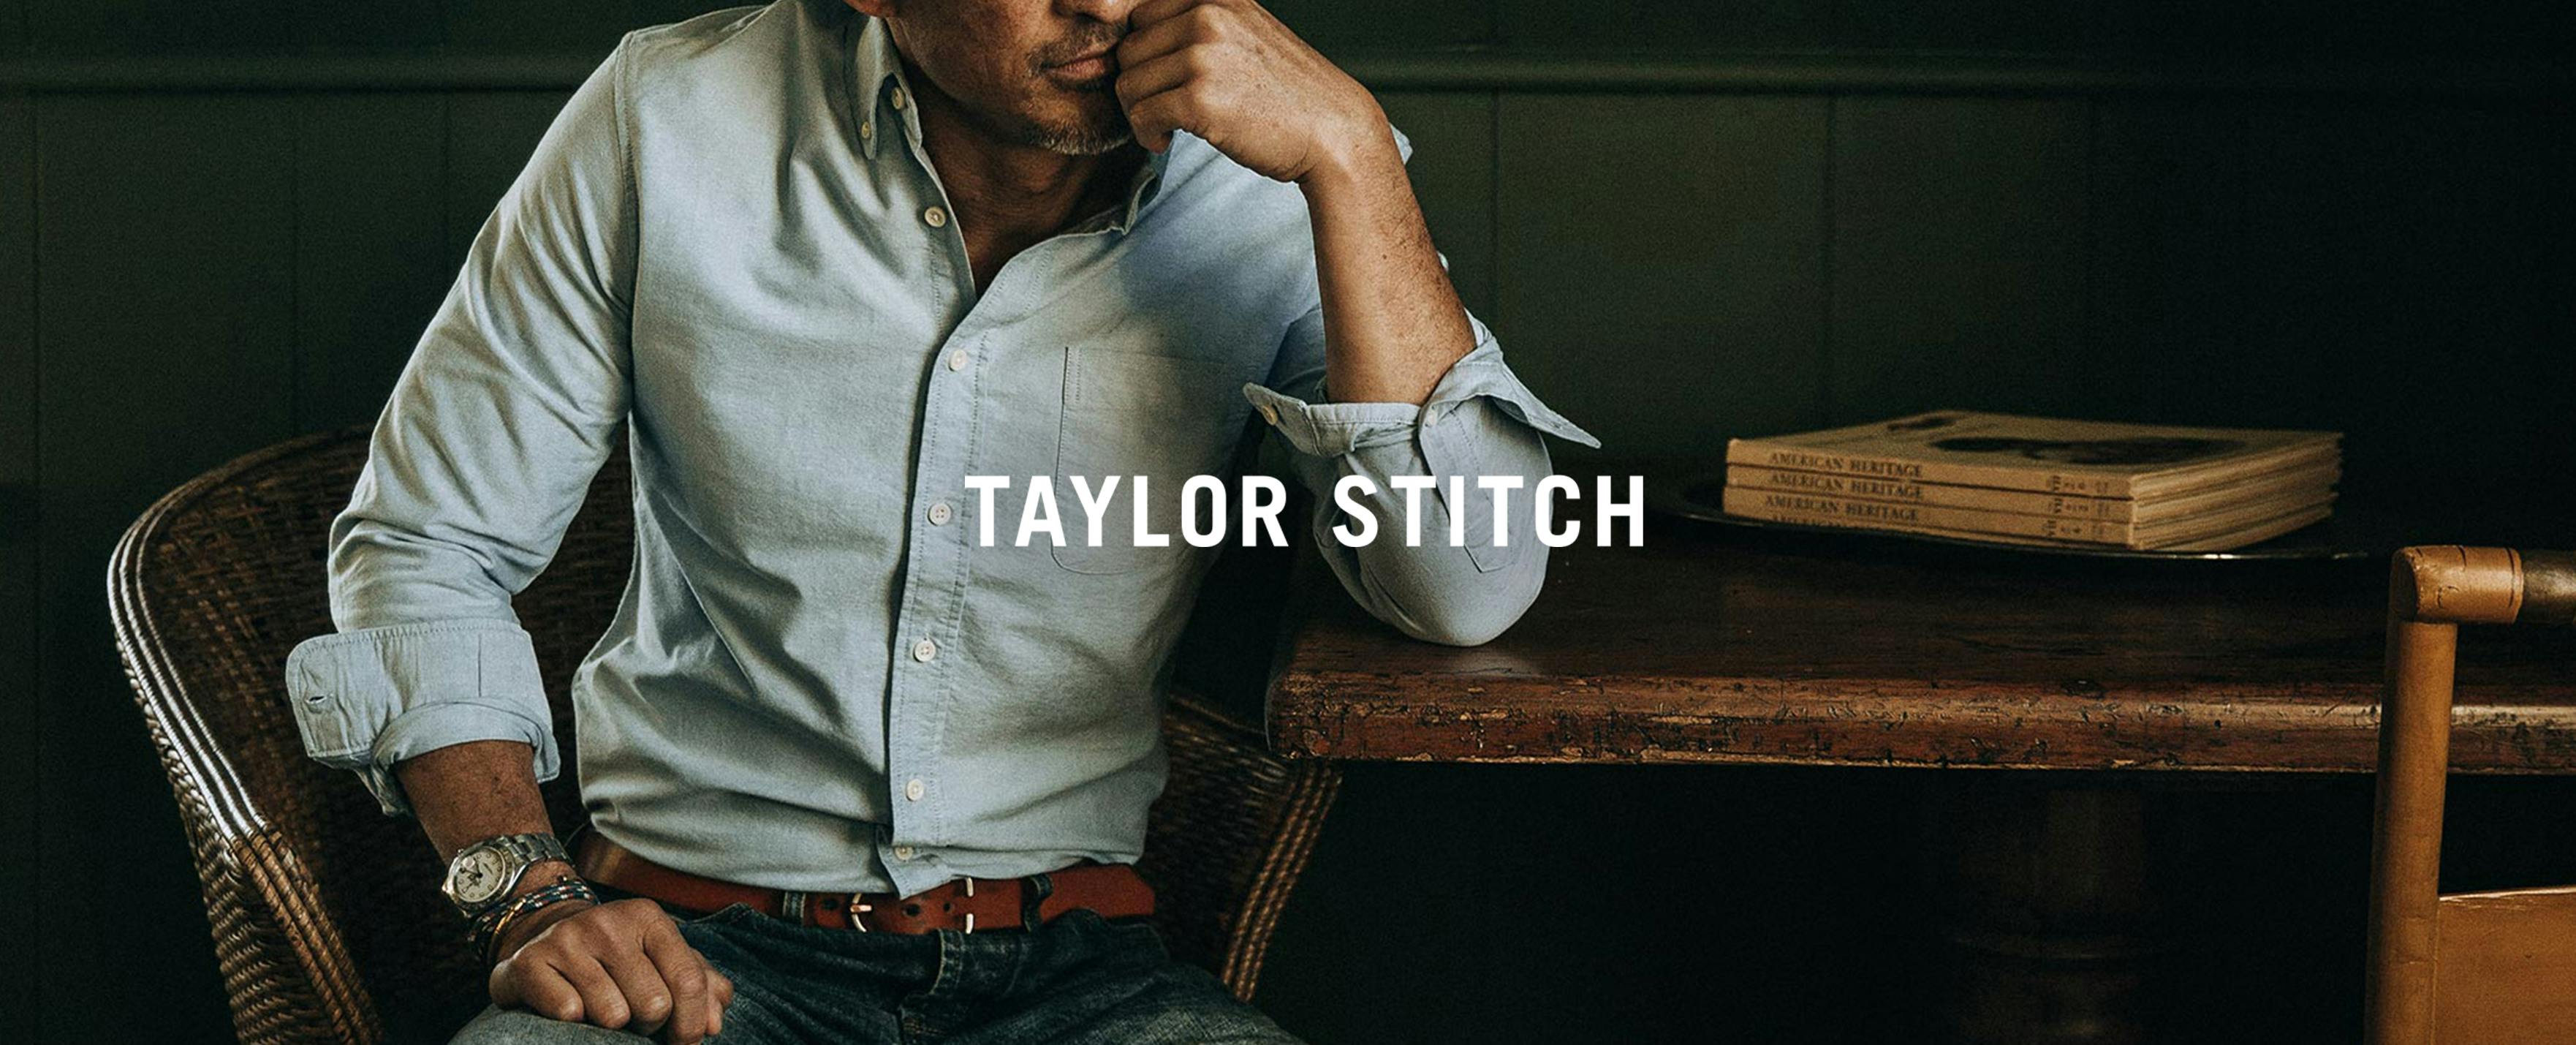 Taylor Stitch logo over image of man wearing button-up shirt